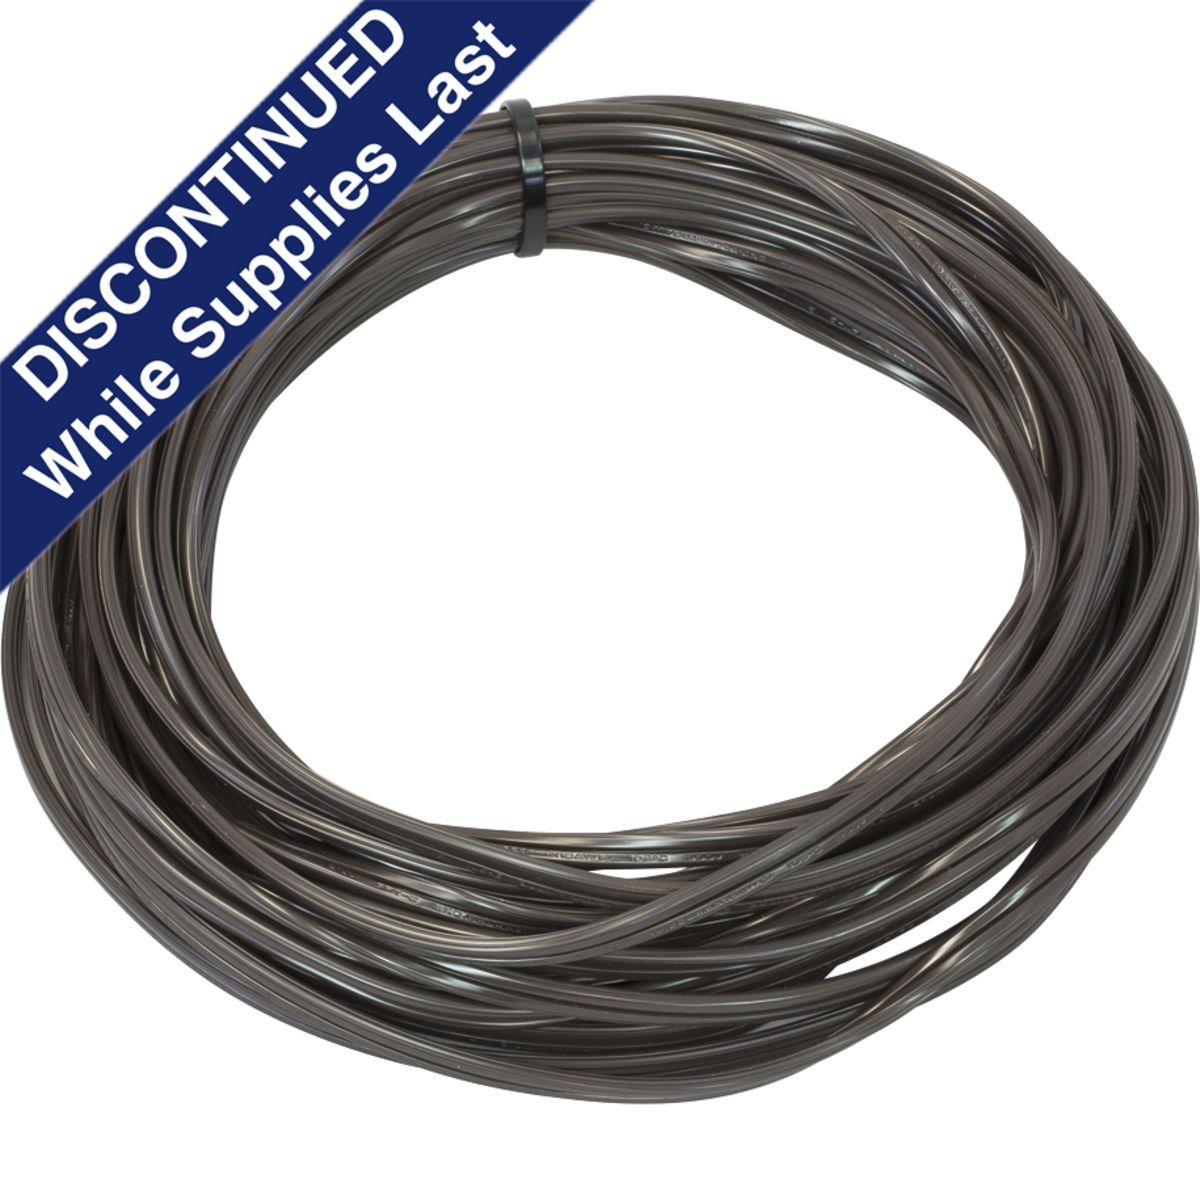 Hubbell P860029-020 20 Feet of SPT-2 wire can be used for direct wiring of the Hide-a-Lite V LED Puck P700005 series. The wiring provides the length needed to daisy chain the LED pucks together. This wire is rated so it can be exposed under the cabinet and is safe to touch. 